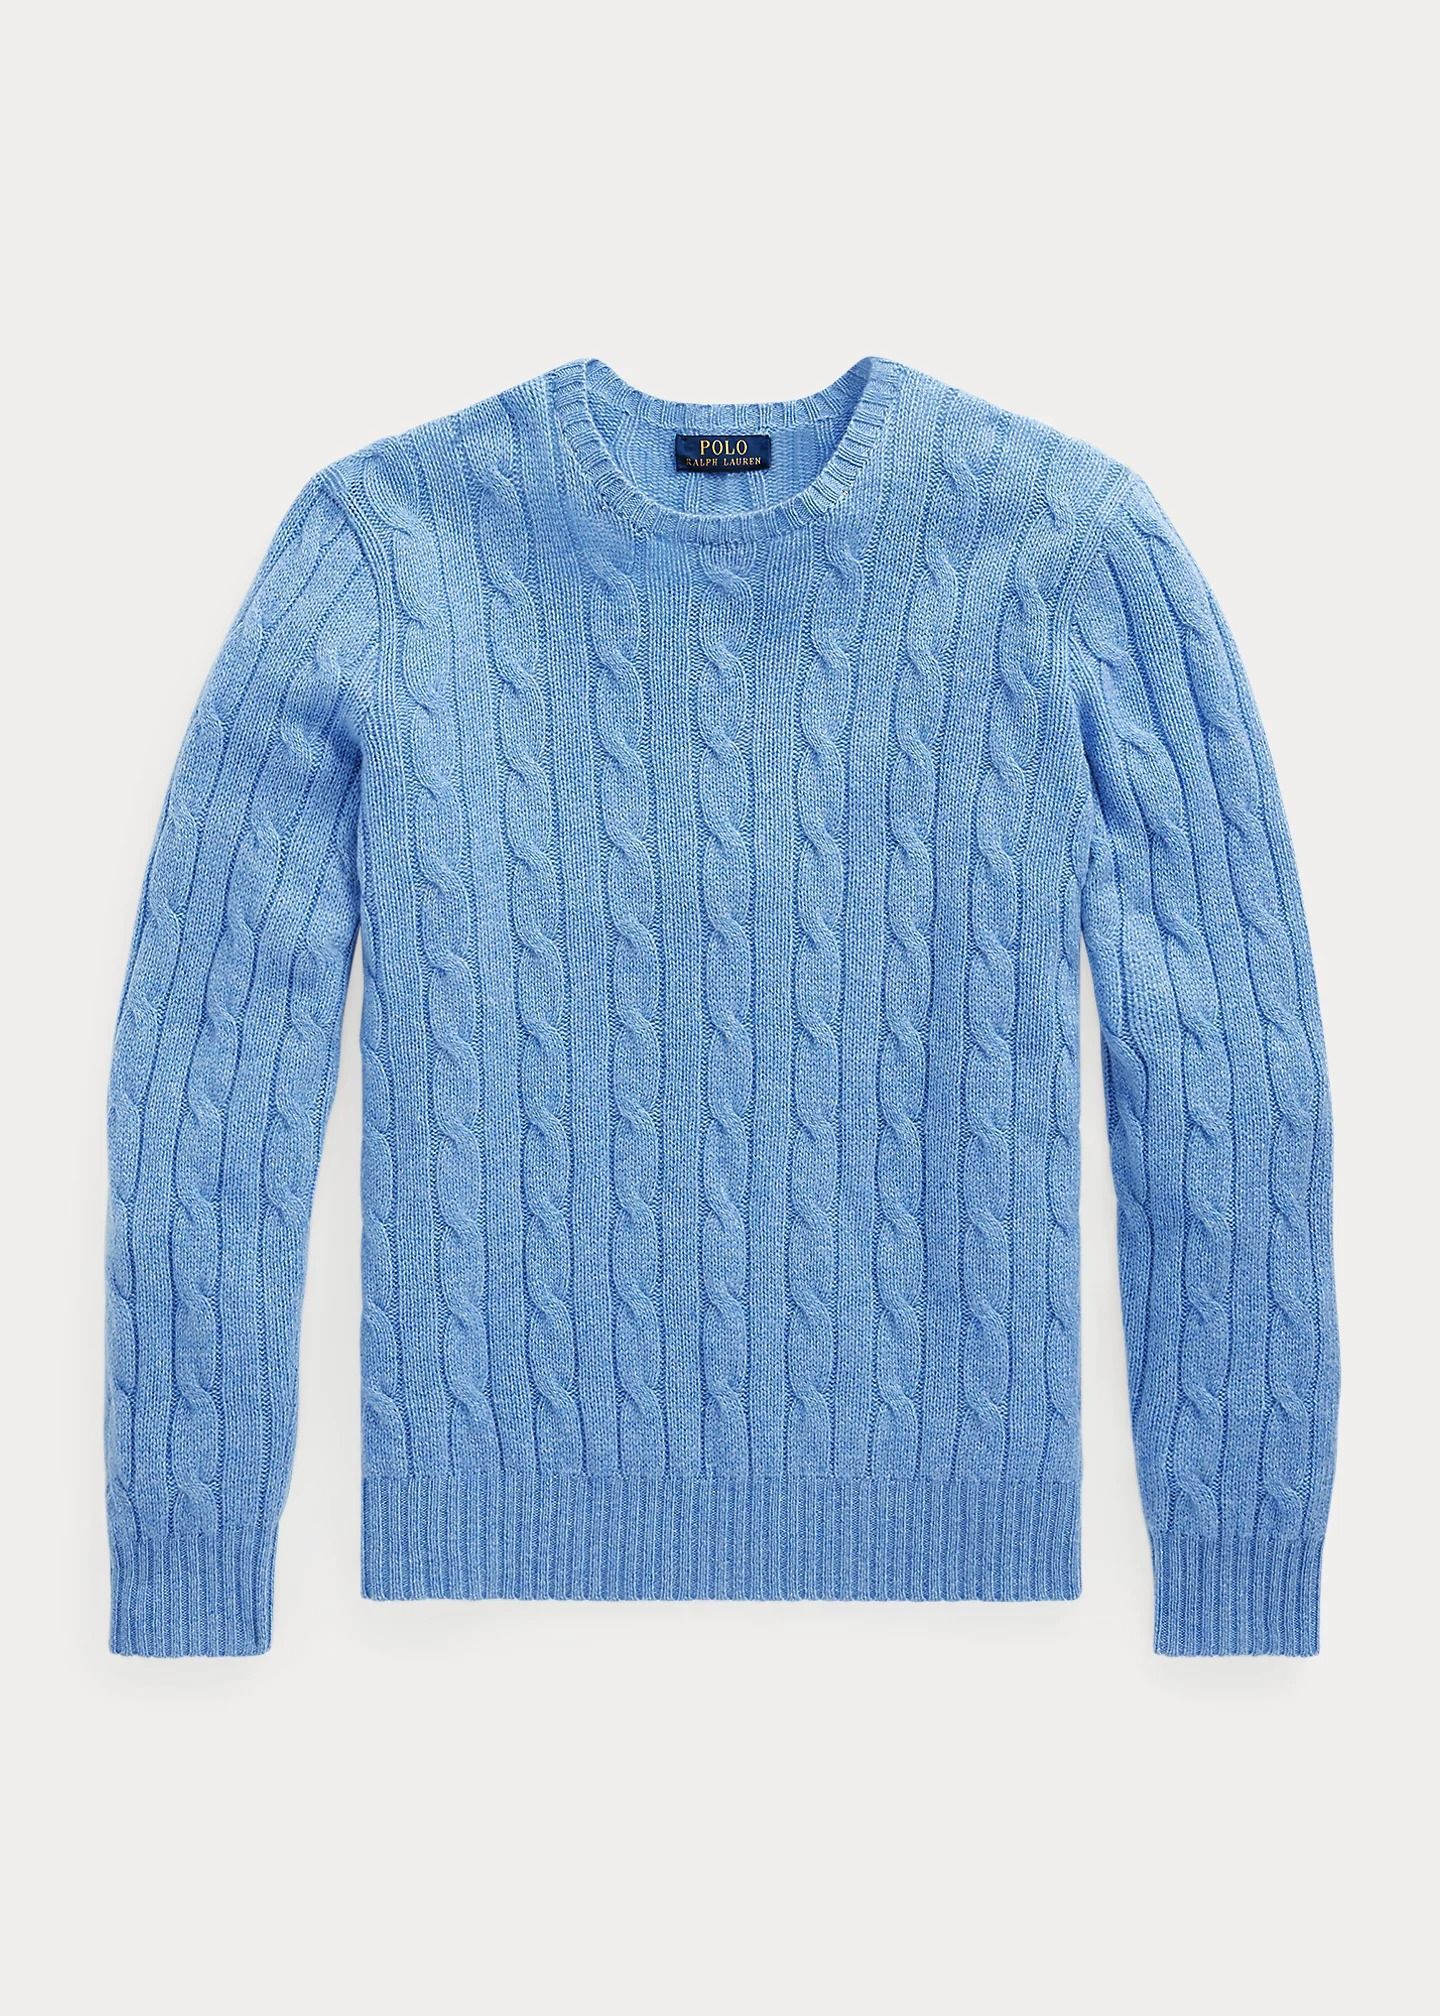 Best Men's Cable Knit Sweaters, According to Style Editors